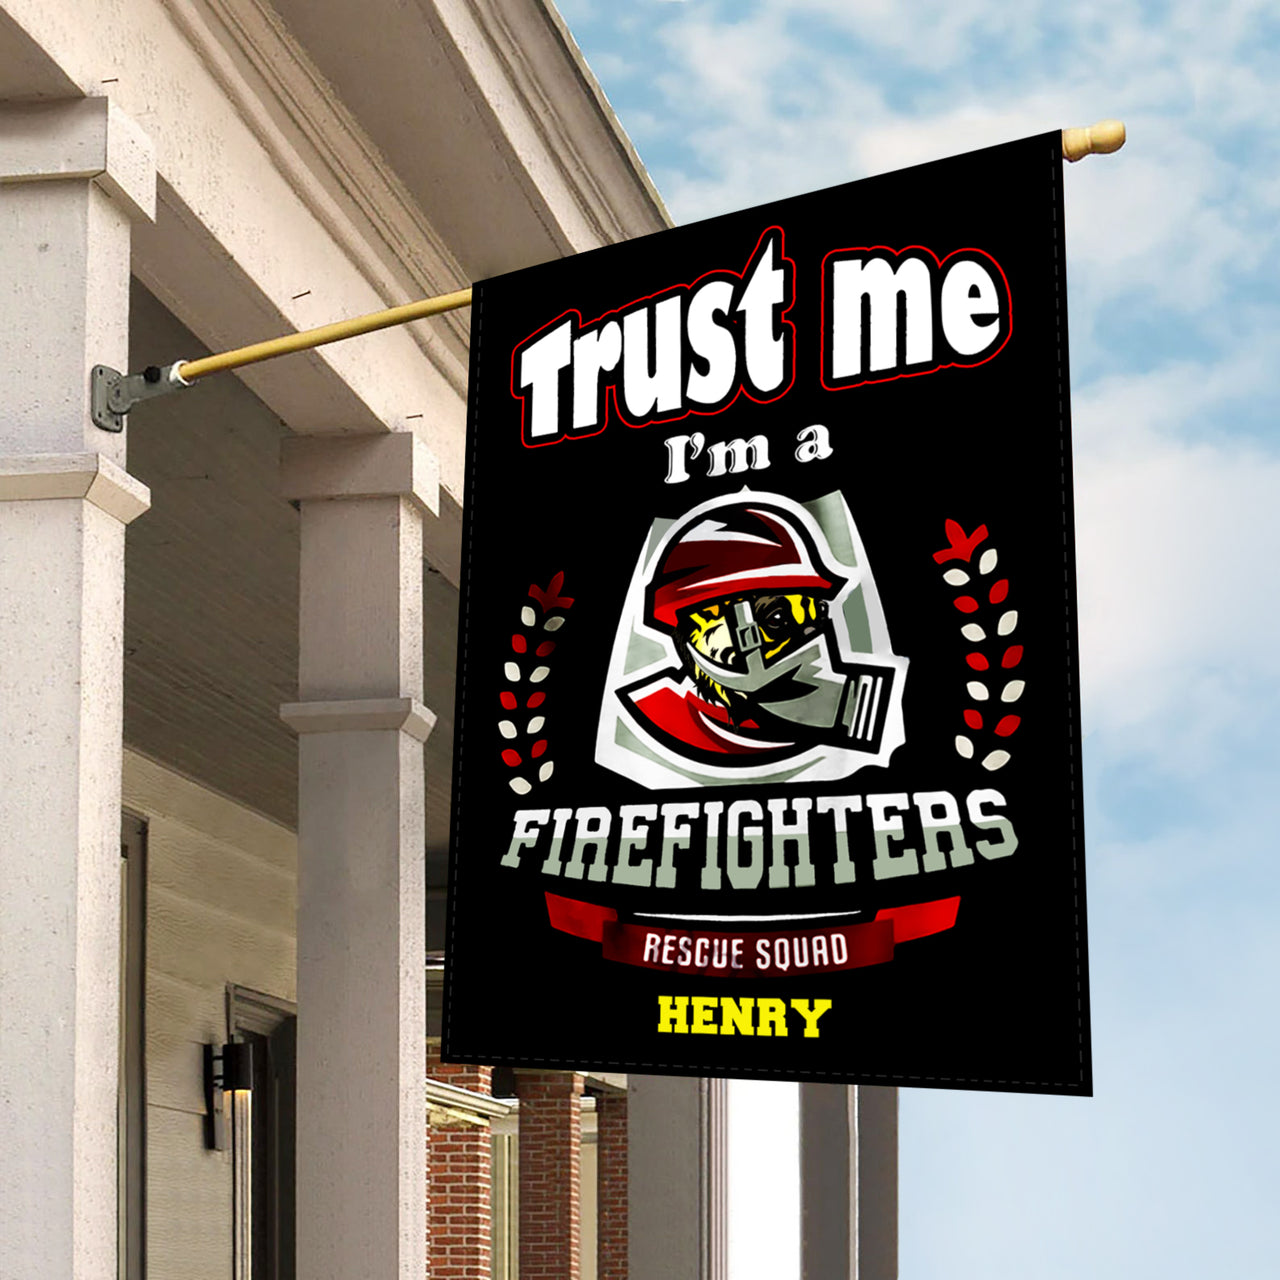 Personalized Dog Gift Idea - Trust Me I'm A Firefighter Rescue Squad For Dog Lovers - Garden Flag